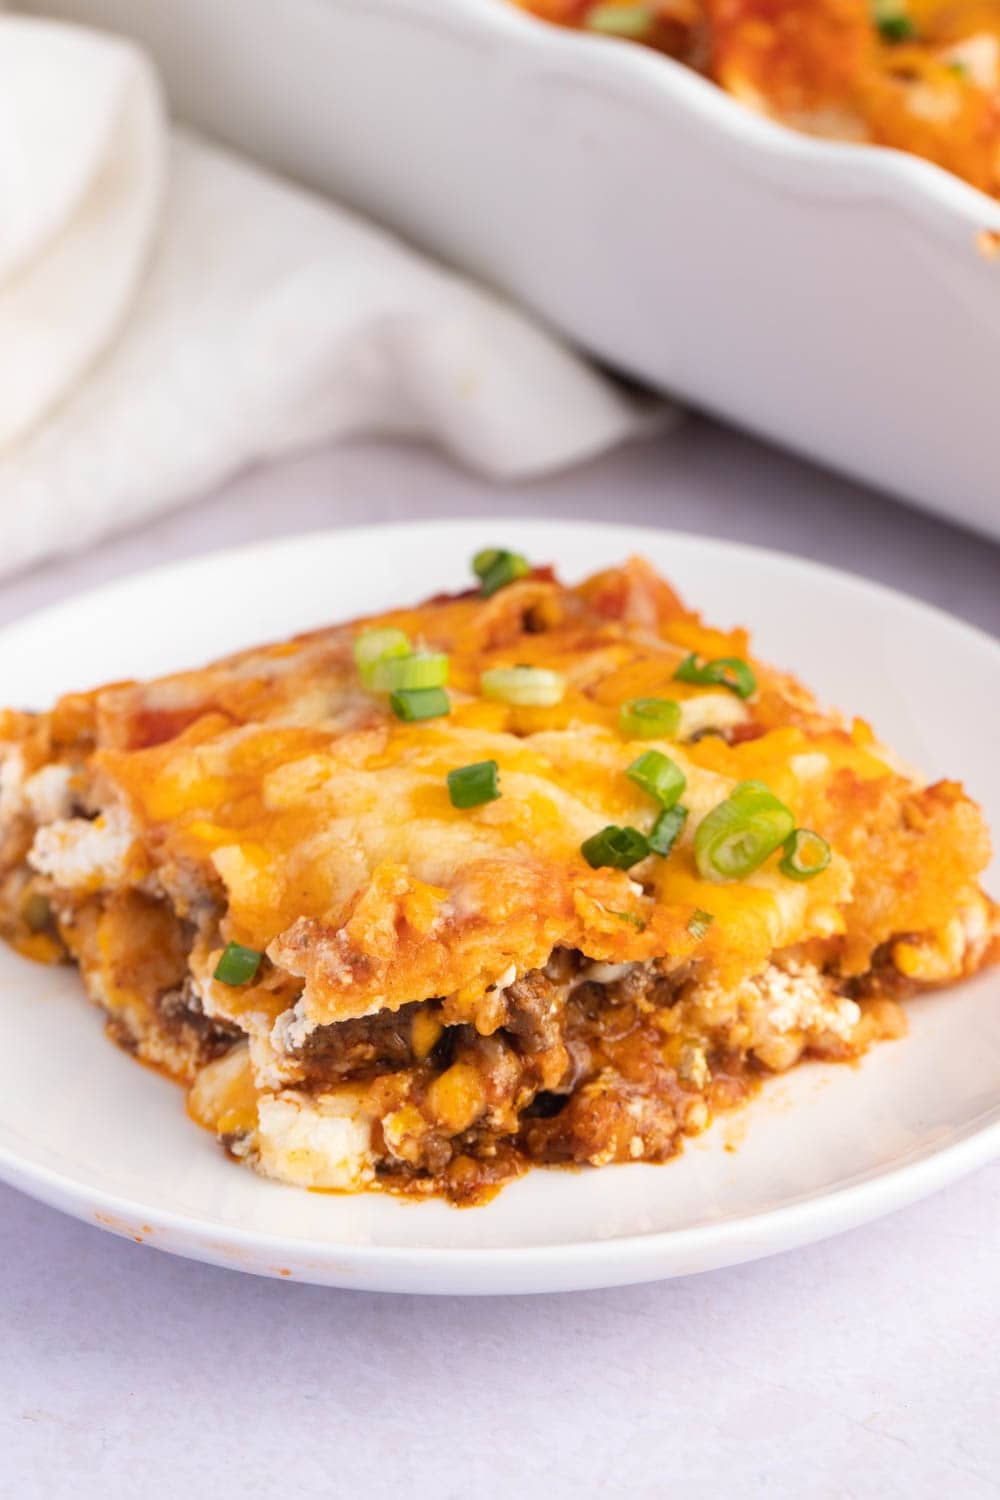 Portion of Cheesy Taco Lasagna with Ground Beef and Green Onions 